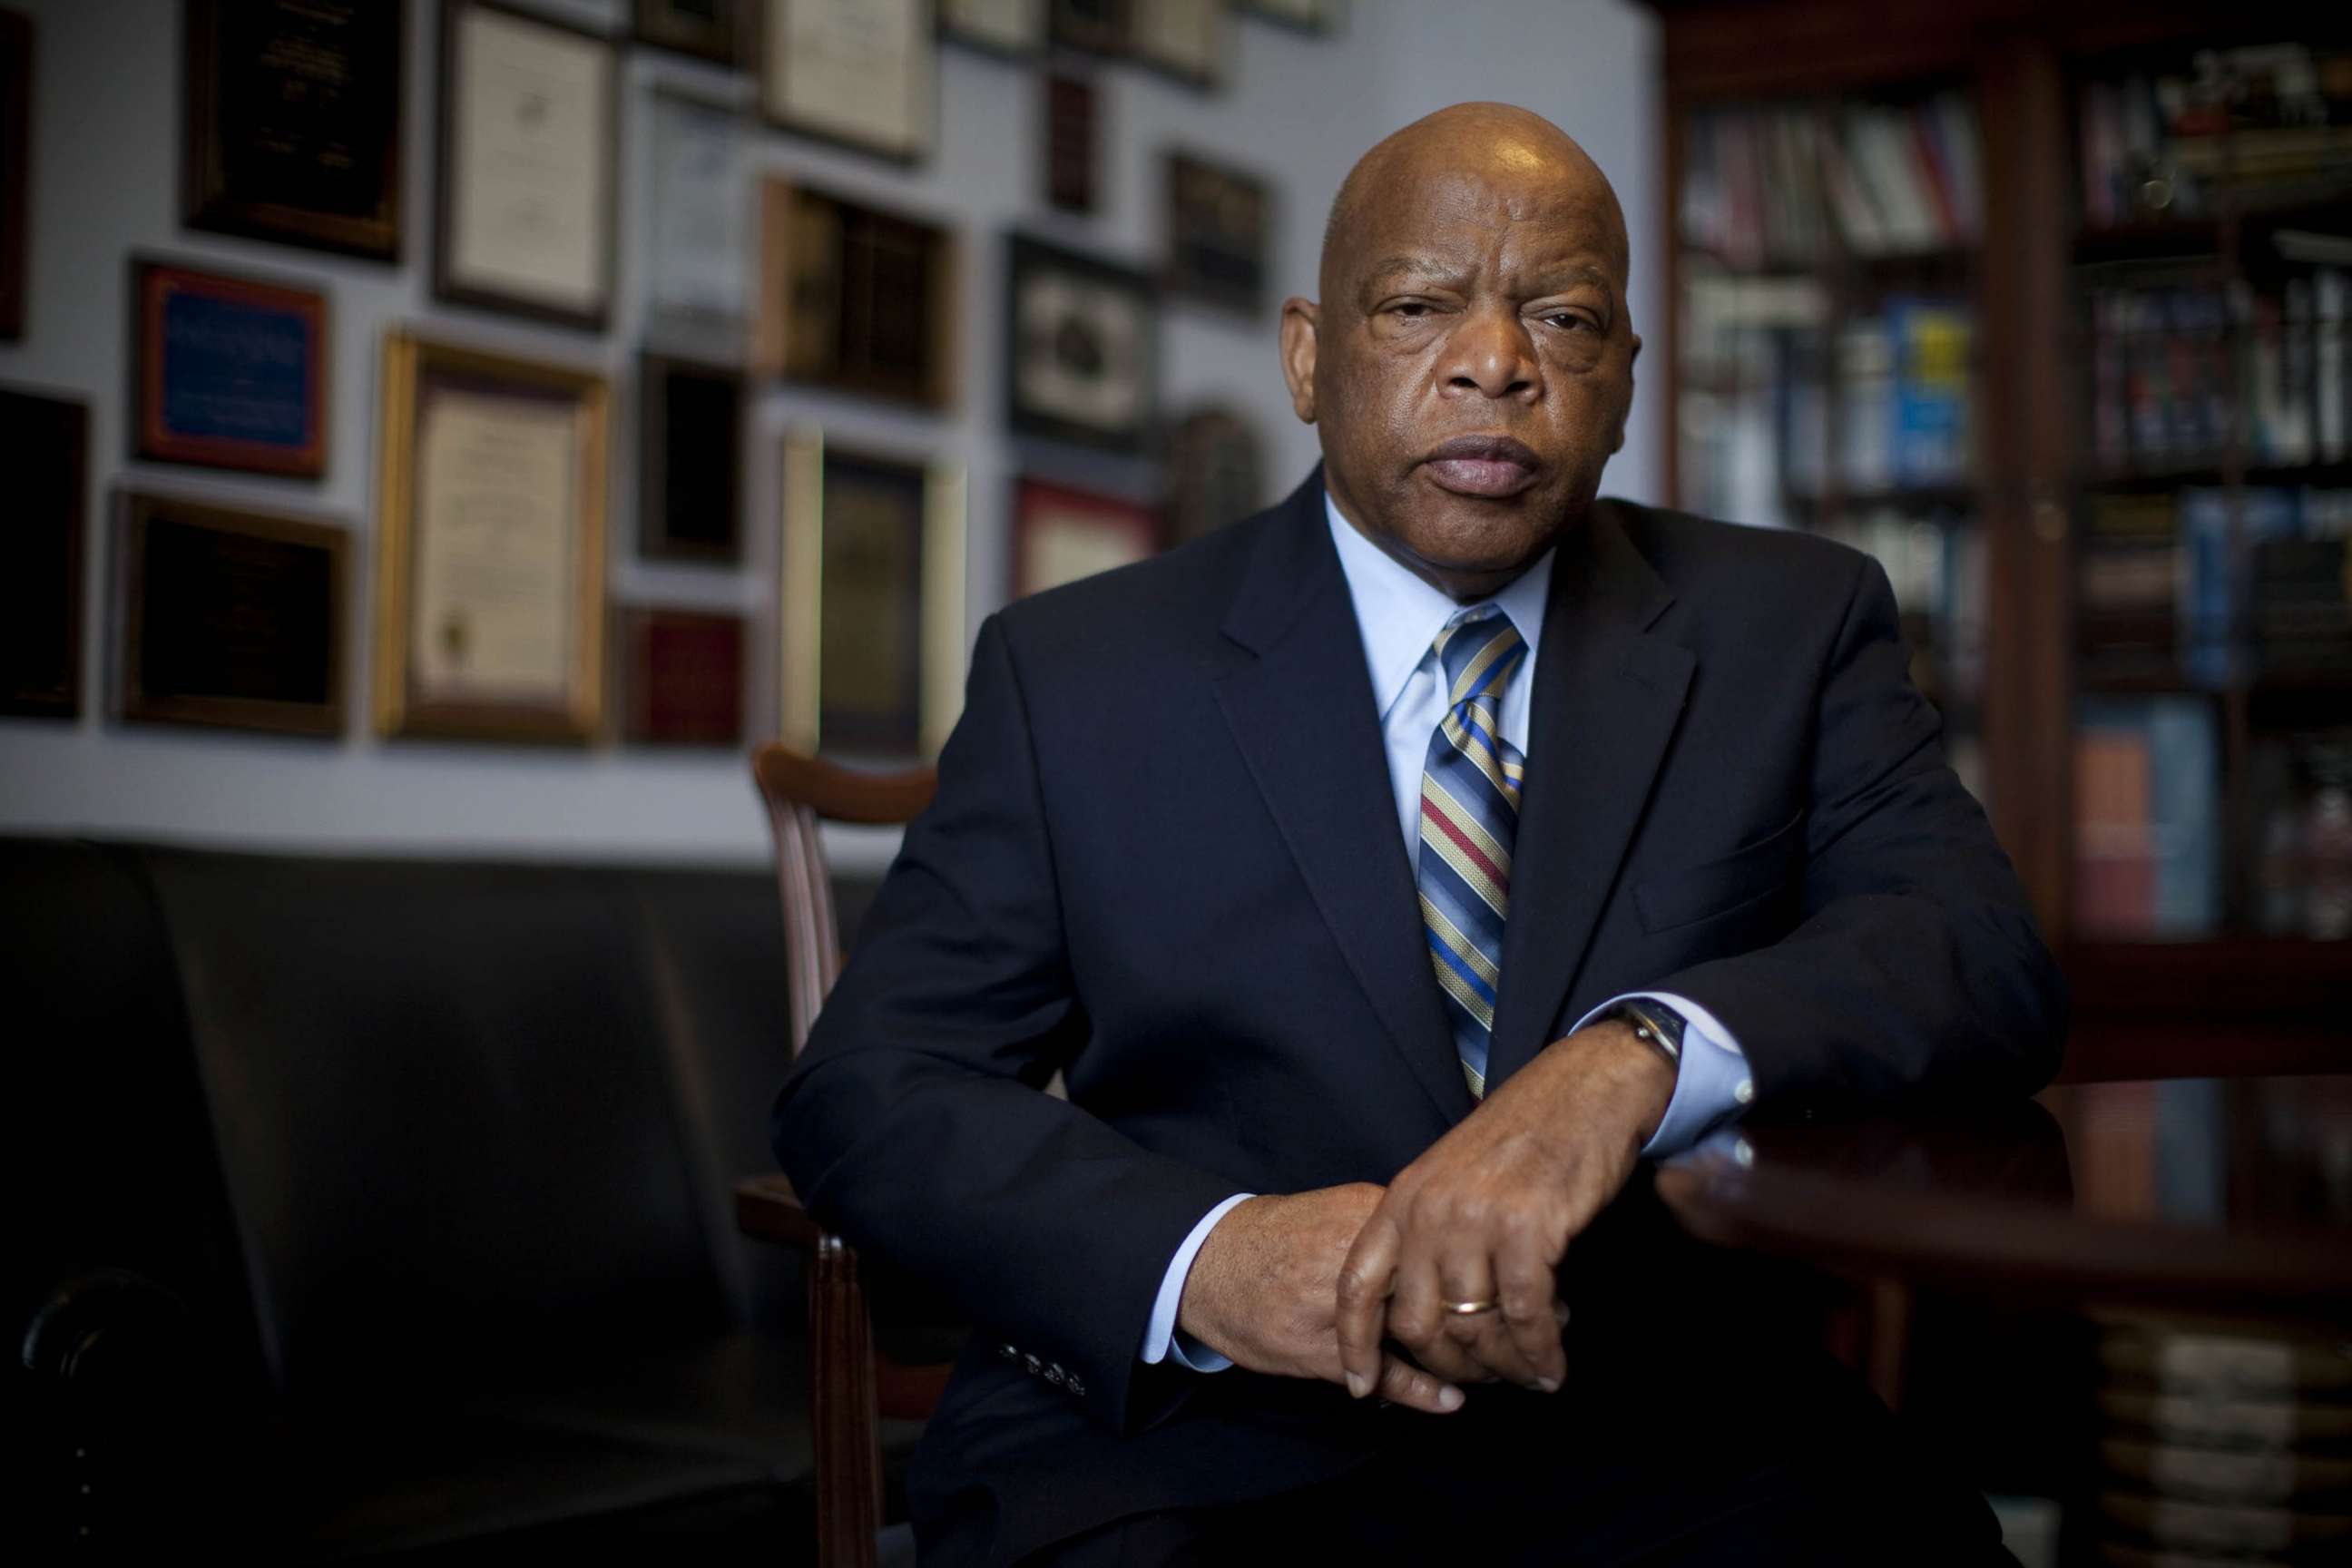 PHOTO: Congressman John Lewis is photographed in his offices in the Canon House office building in Washington, March 17, 2009.